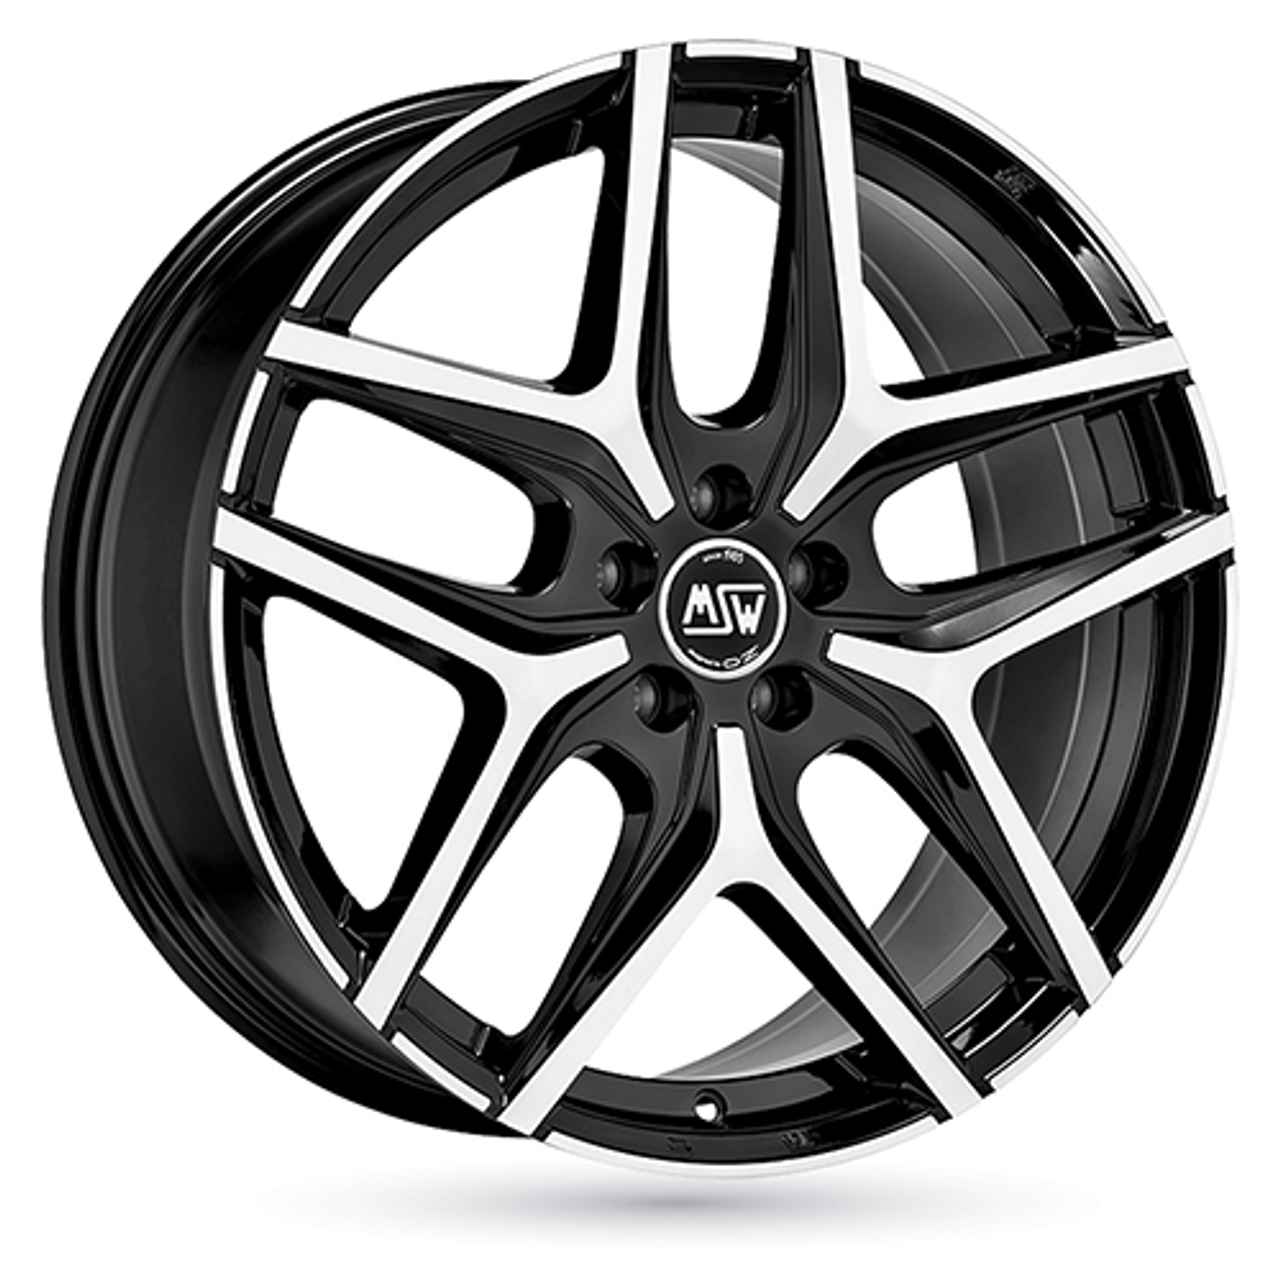 MSW (OZ) MSW 40 gloss black full polished 8.0Jx18 5x112 ET48